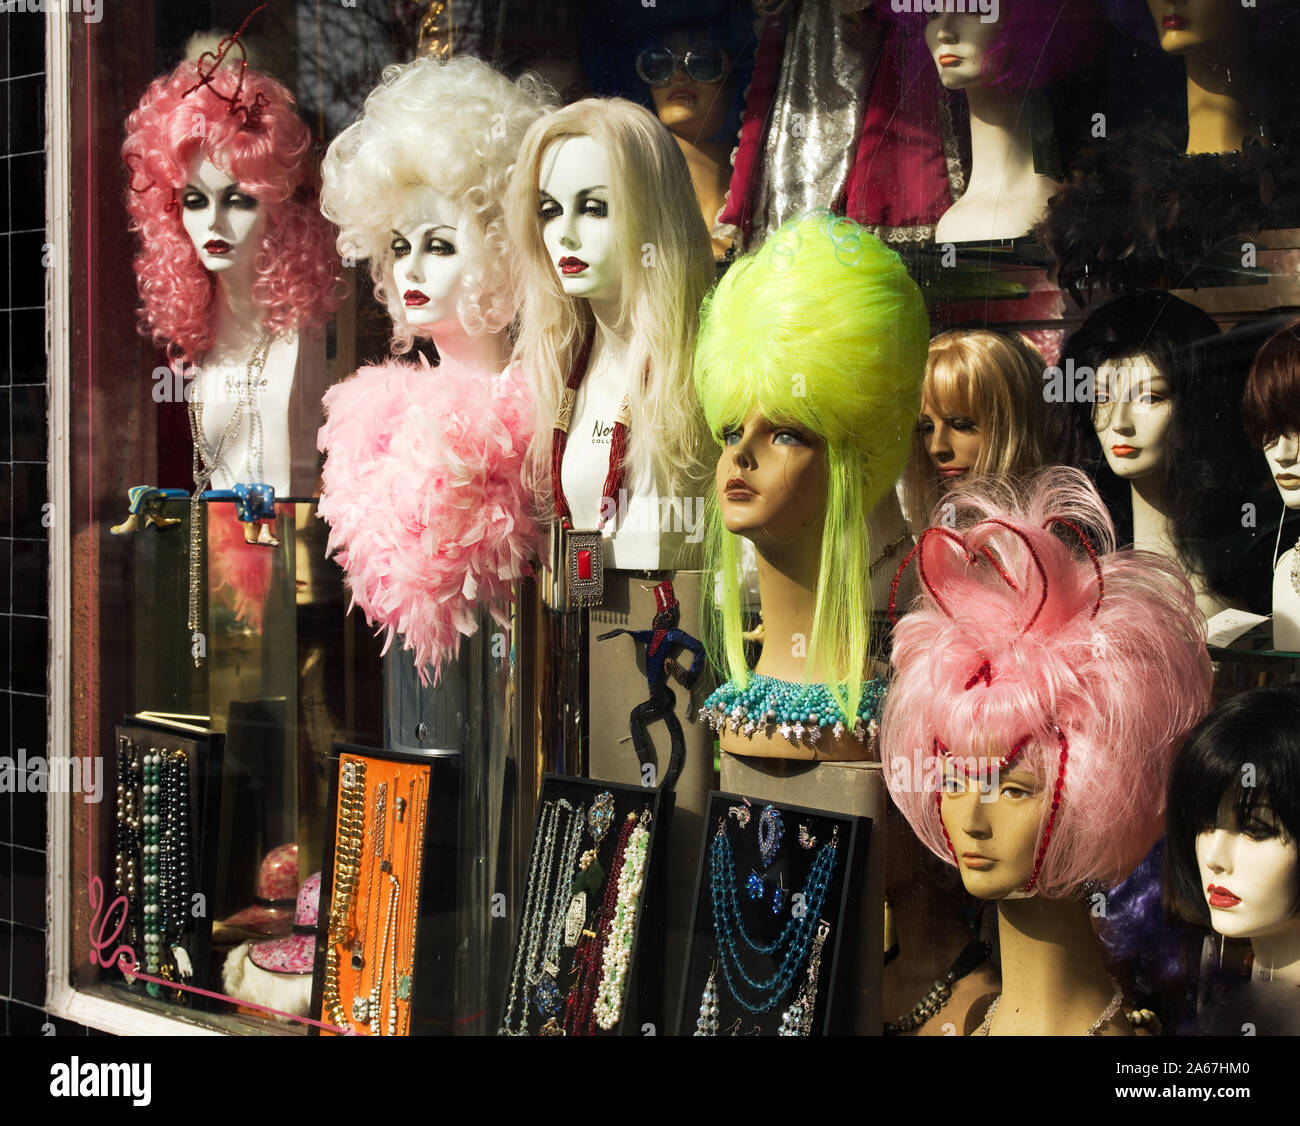 Wig Shop Window High Resolution Stock Photography and Images - Alamy